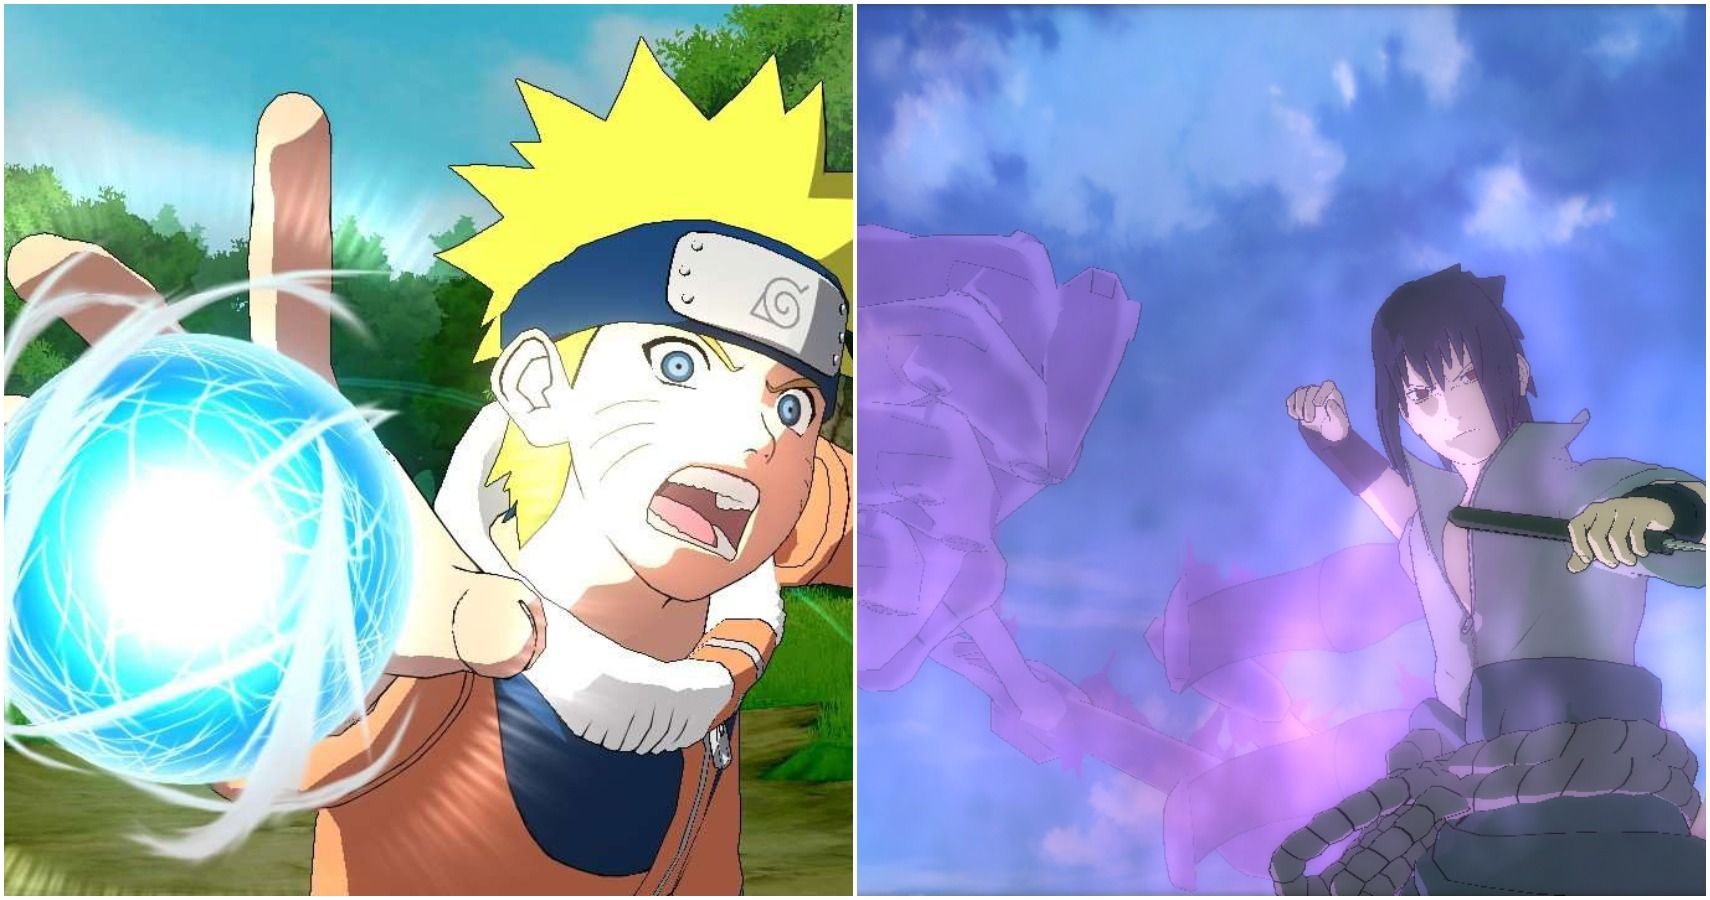 15 Best Naruto Video Games Ranked Thegamer - 100 cooler than naruto ads roblox